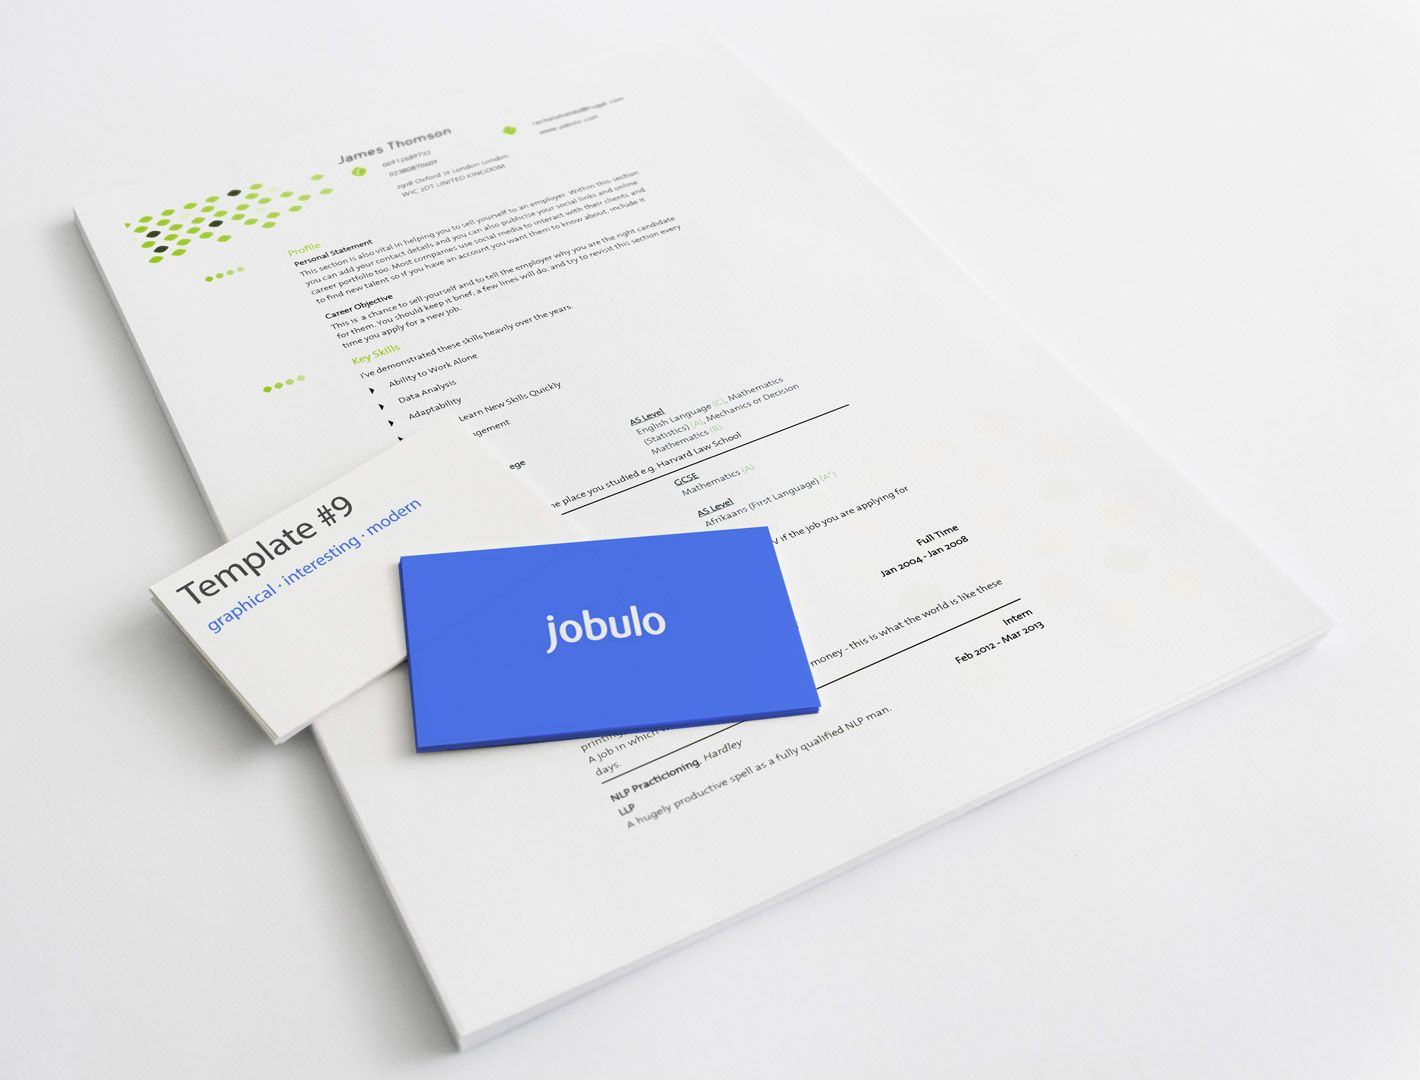 5 Reasons why CV Design is Important